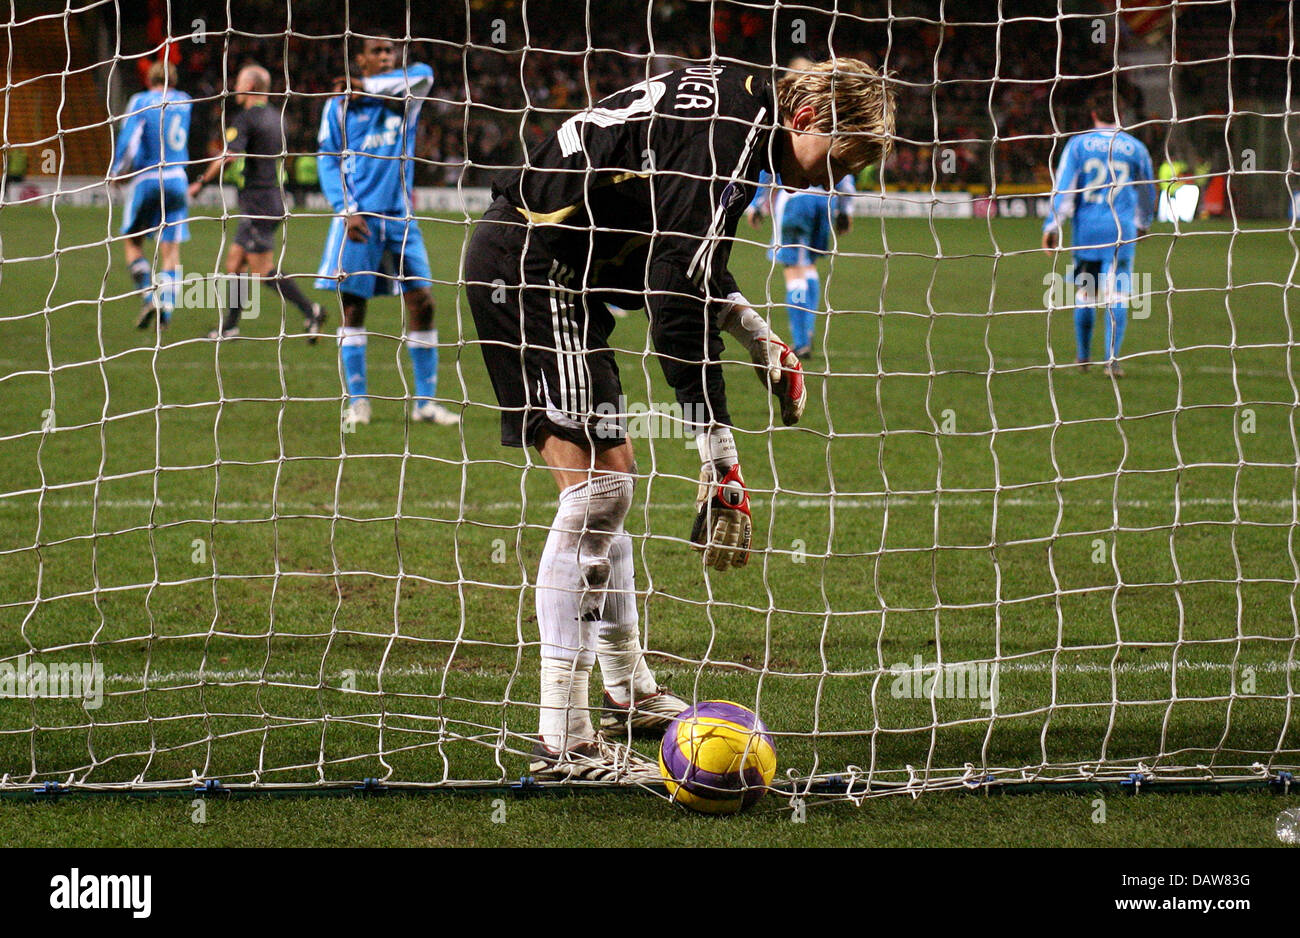 Leverkusen's goalkeeper Rene Adler reaches for the ball disappointedly after Lens' successful penalty shot during the UEFA Cup match RC Lens vs Bayer 04 Leverkusen at Félix-Bollaert Stadium in Lens, France, Thursday 08 March 2007. Leverkusen lost to Lens by 1-2. Photo: Felix Heyder Stock Photo